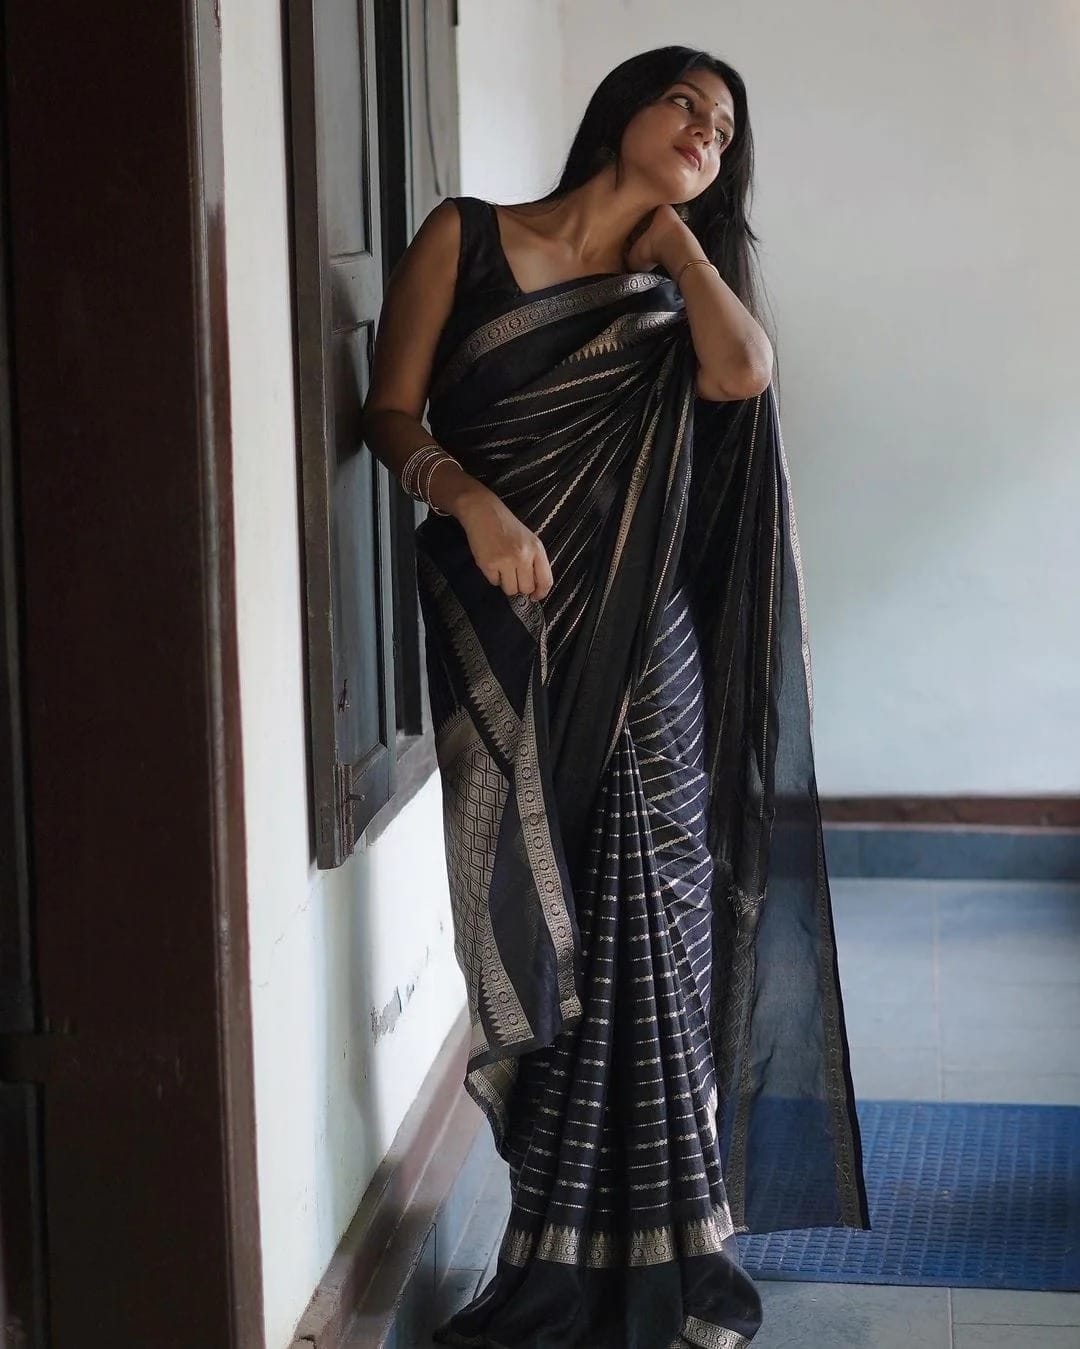 Katrina Kaif serves a perfect cocktail party look in sheer black saree with  sequin blouse | Times of India